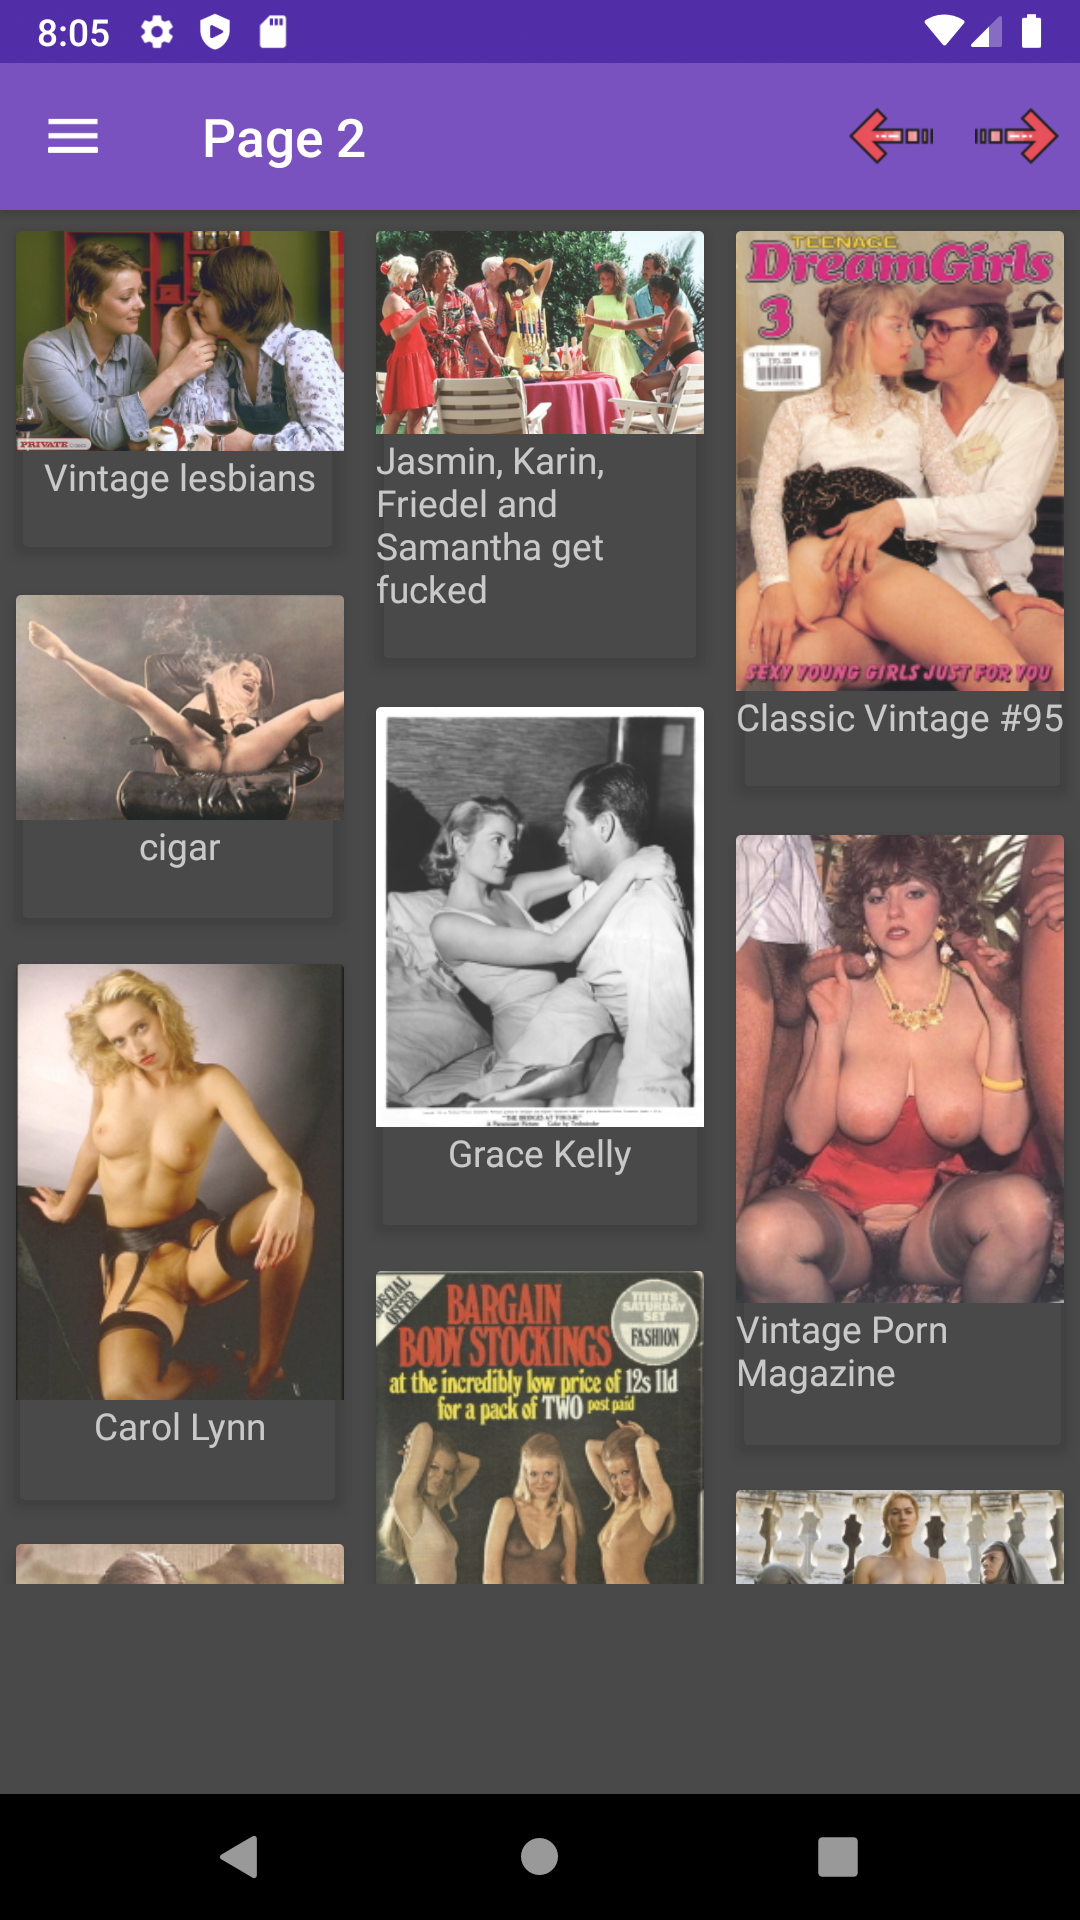 Vintage Porn hintai,best,picture,for,hot,gallery,sexy,hentai,манга,android,app,adult,porn,collection,pictures,apk,sissy,apps,photos,страпон,pornstars,galleries,pics